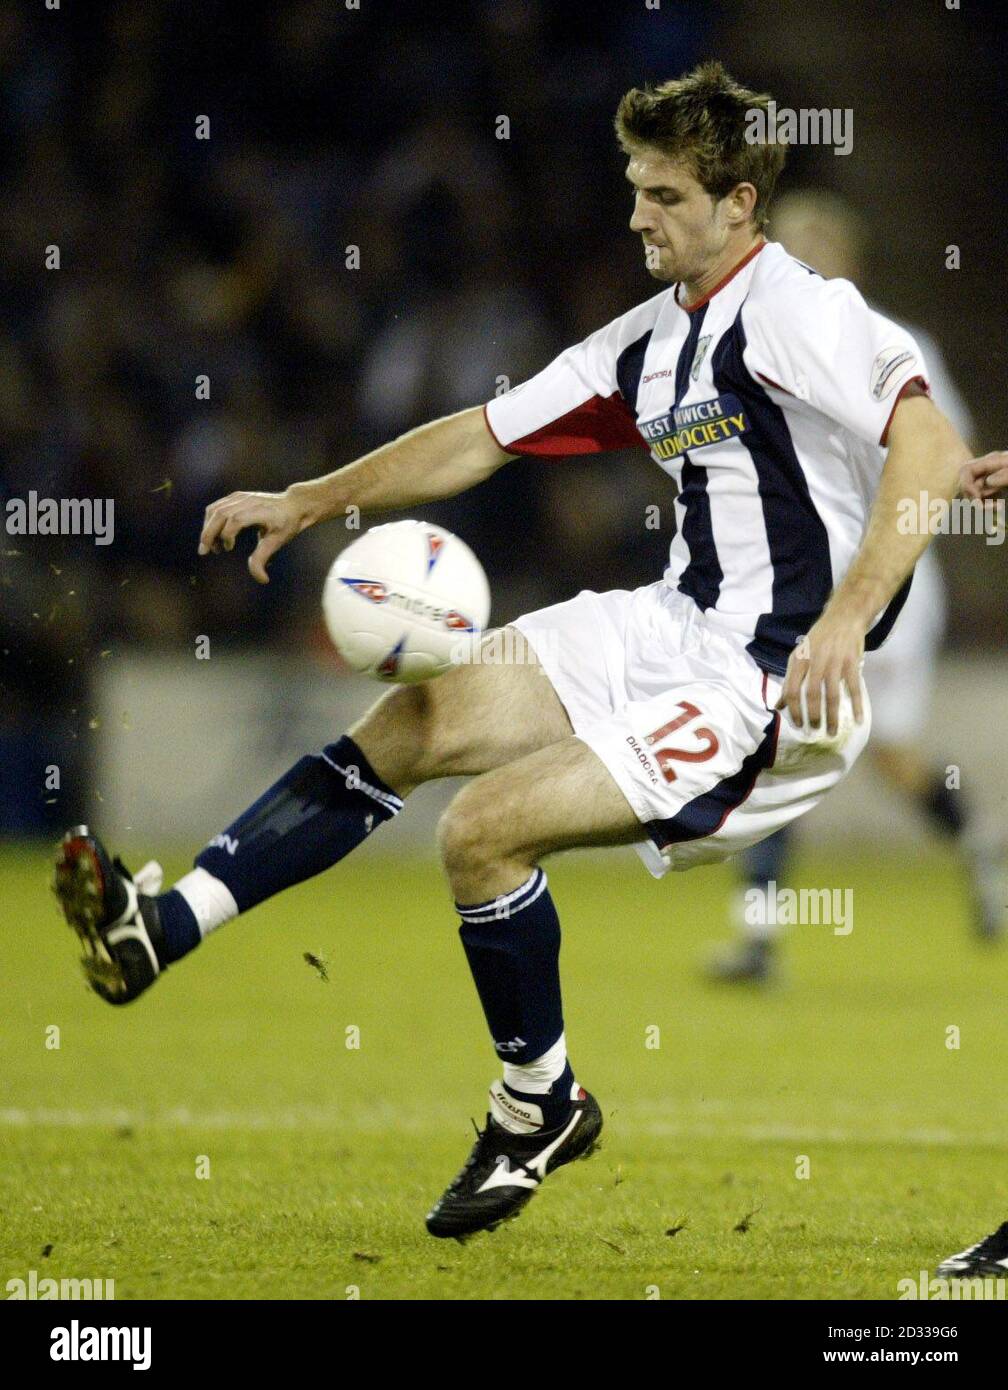 Scott Dobie of West Bromwich Albion during Nationwide Division One game at The Hawthorns, West Bromwich. THIS PICTURE CAN ONLY BE USED WITHIN THE CONTEXT OF AN EDITORIAL FEATURE. NO UNOFFICIAL CLUB WEBSITE USE. Stock Photo